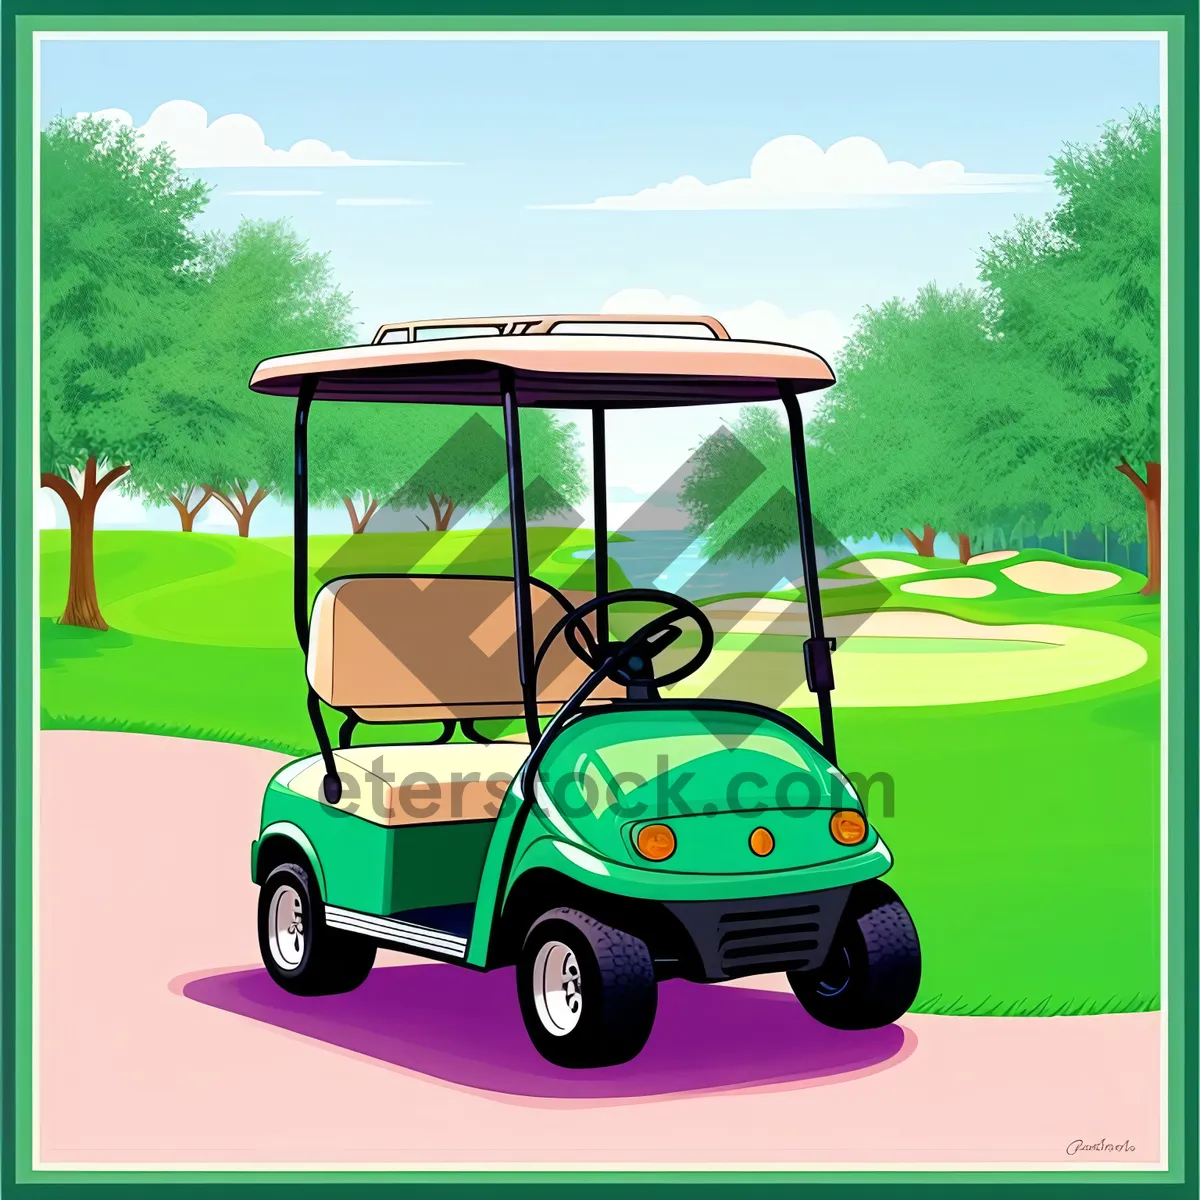 Picture of Golf Cart - Driving on the Course